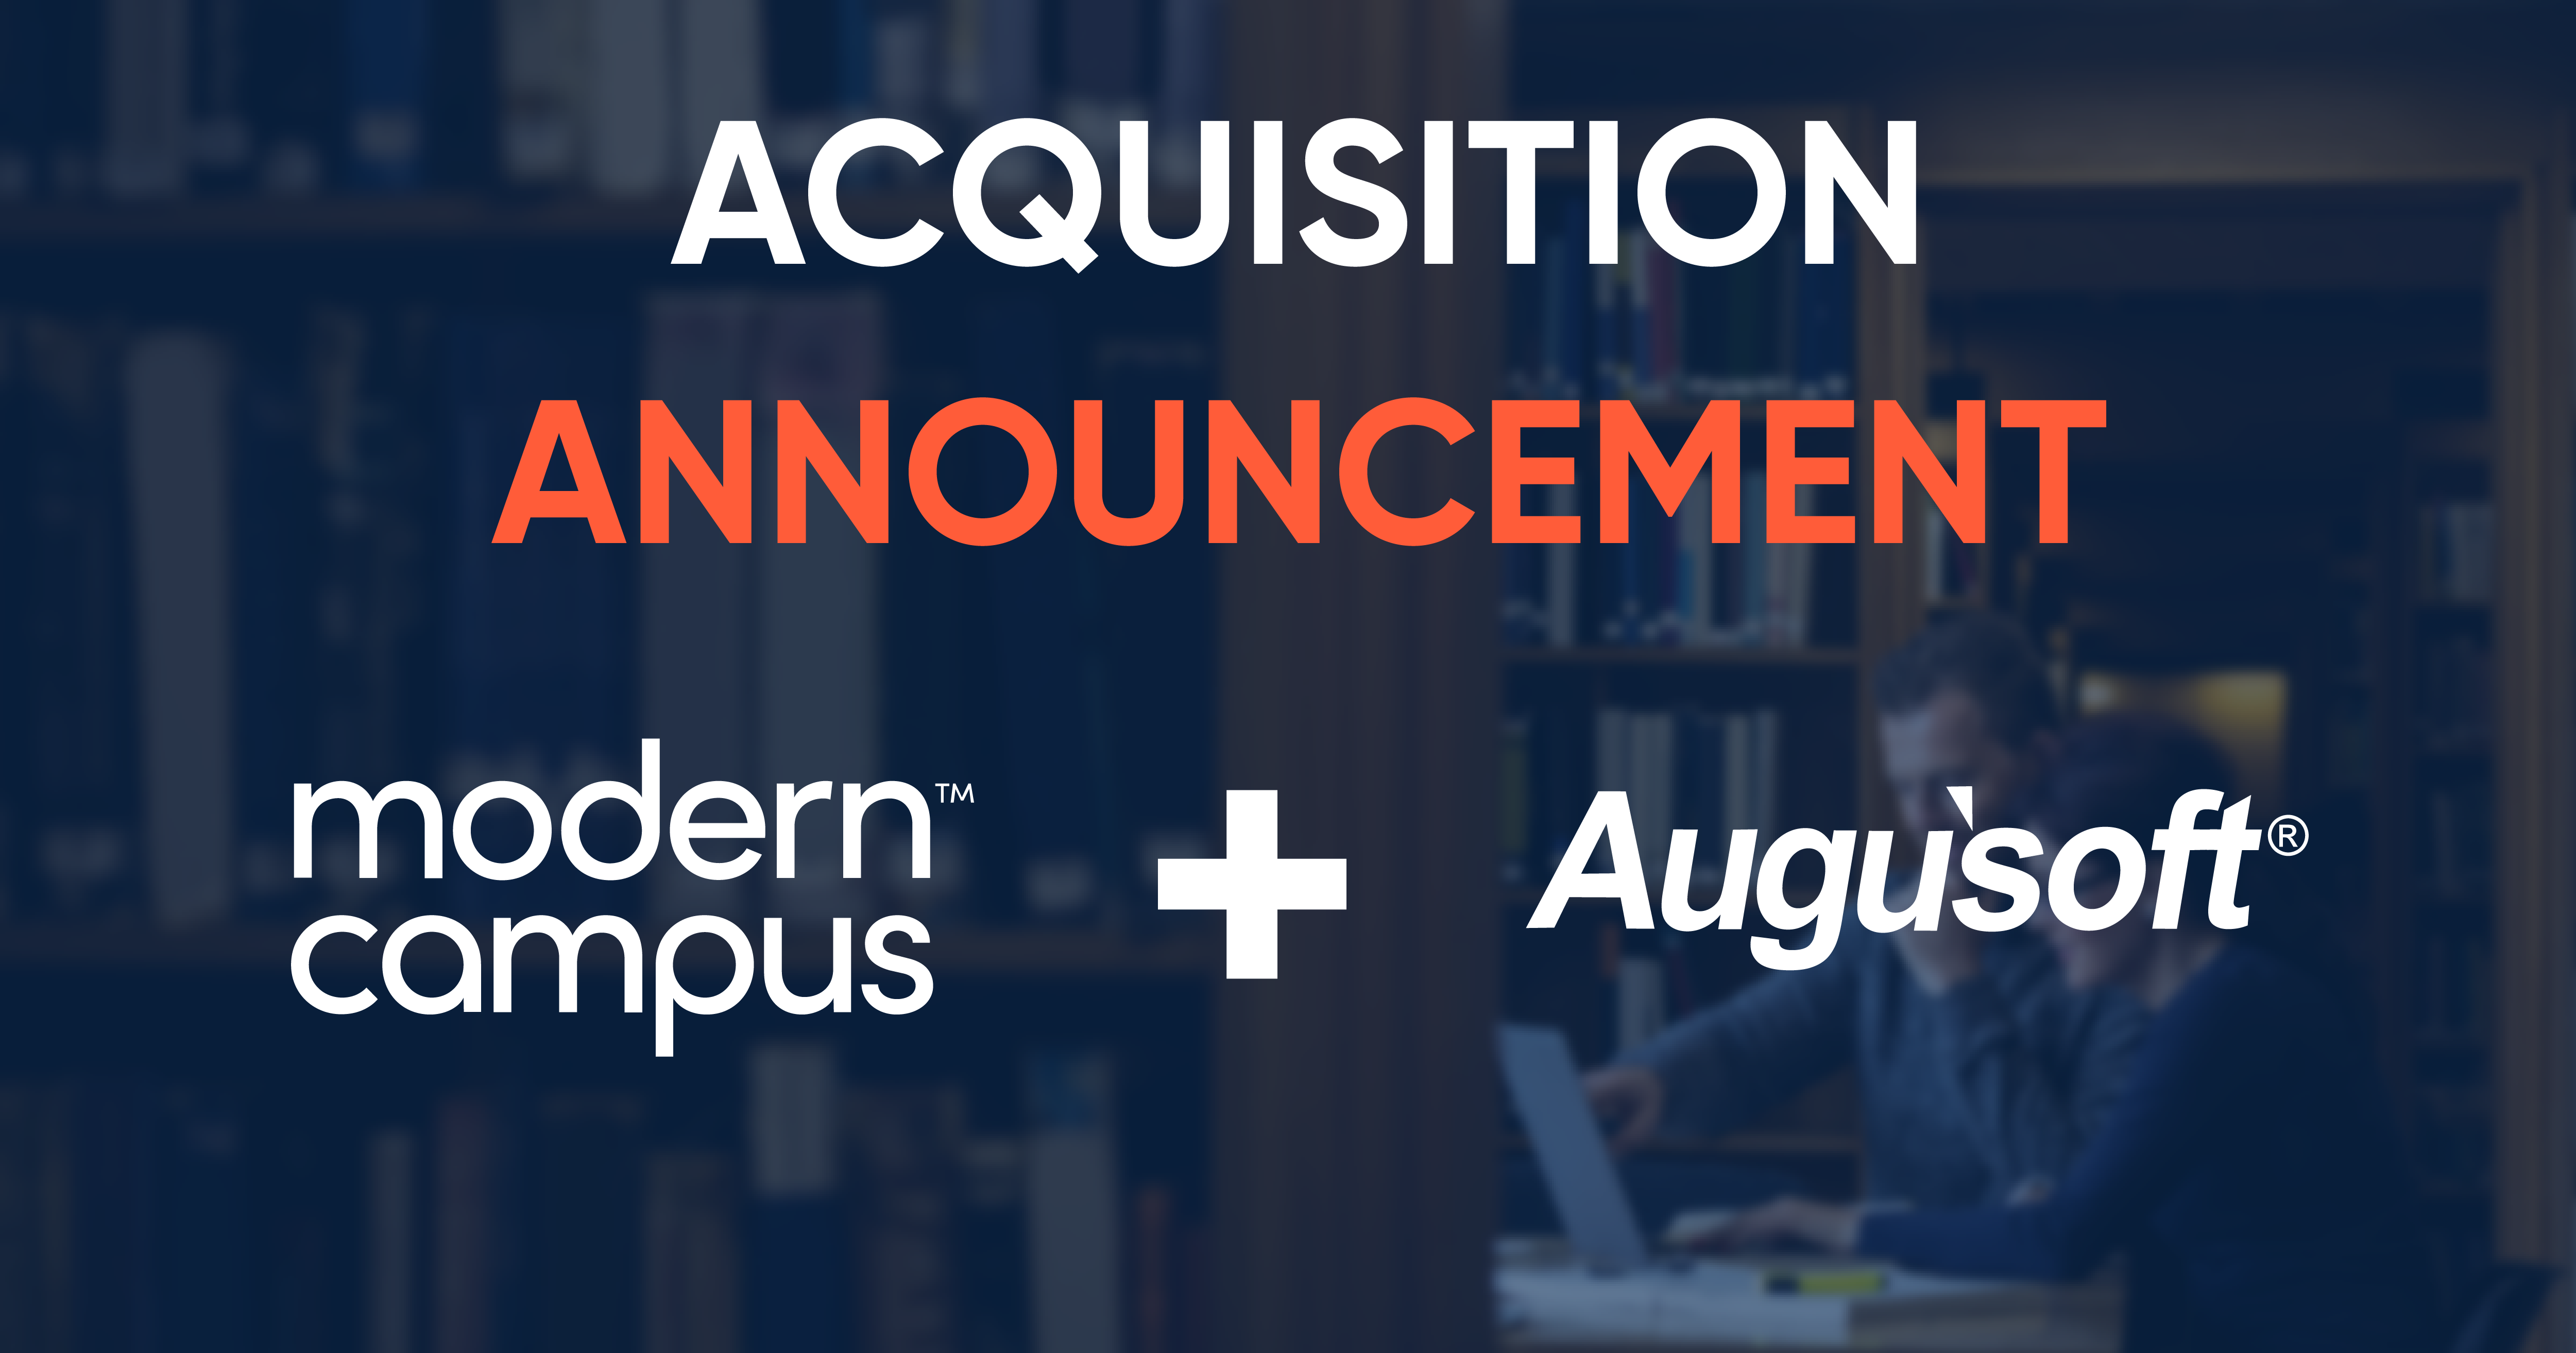 Modern Campus has acquired Augusoft